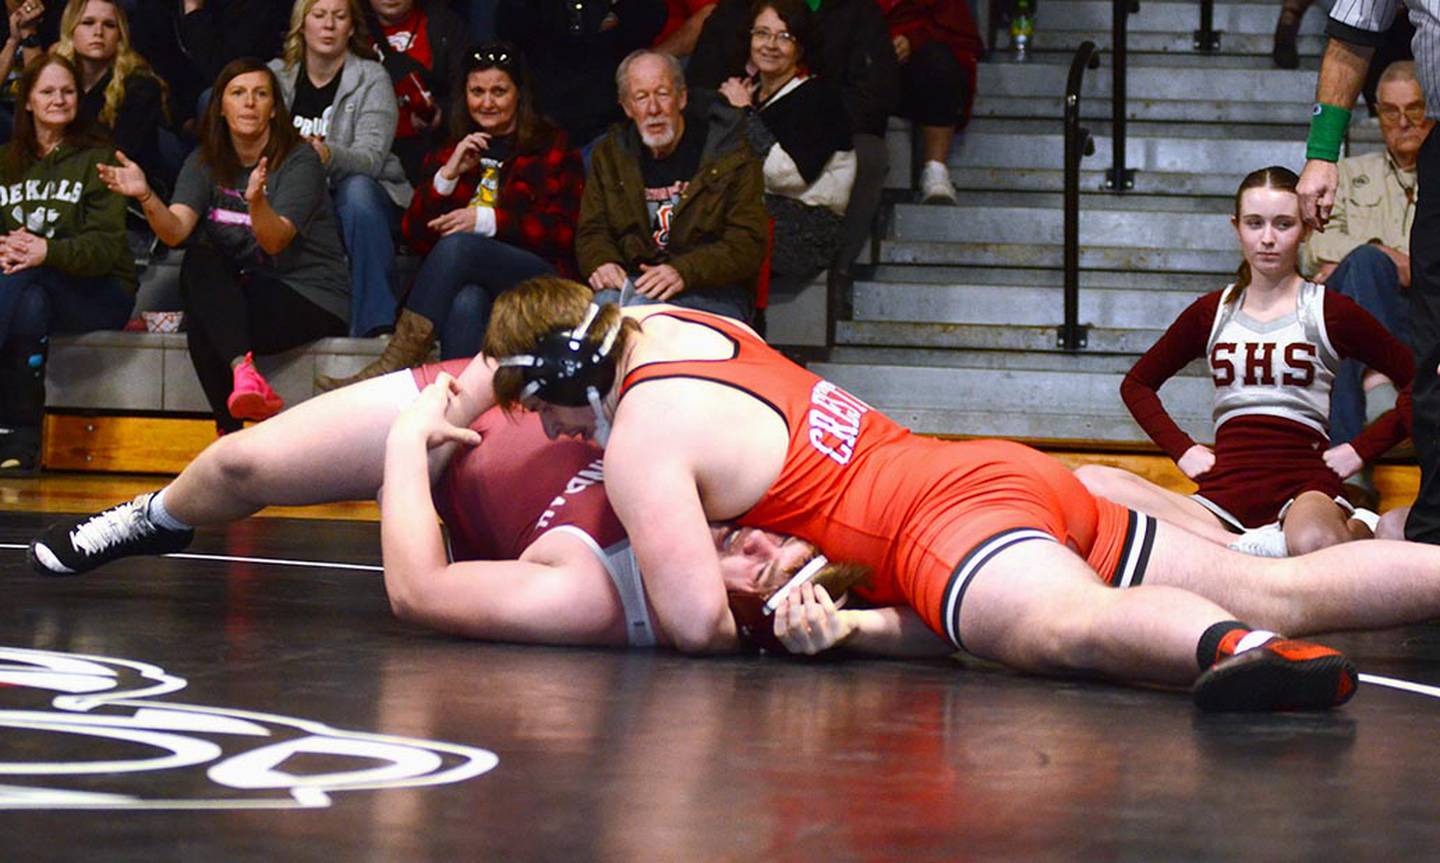 Creston's Max Chapman finishes a pin in 32 seconds against Shenandoah's Steven Perkins in their 285-pound match Thursday. Chapman also had an 11-second pin against Denison-Schleswig.